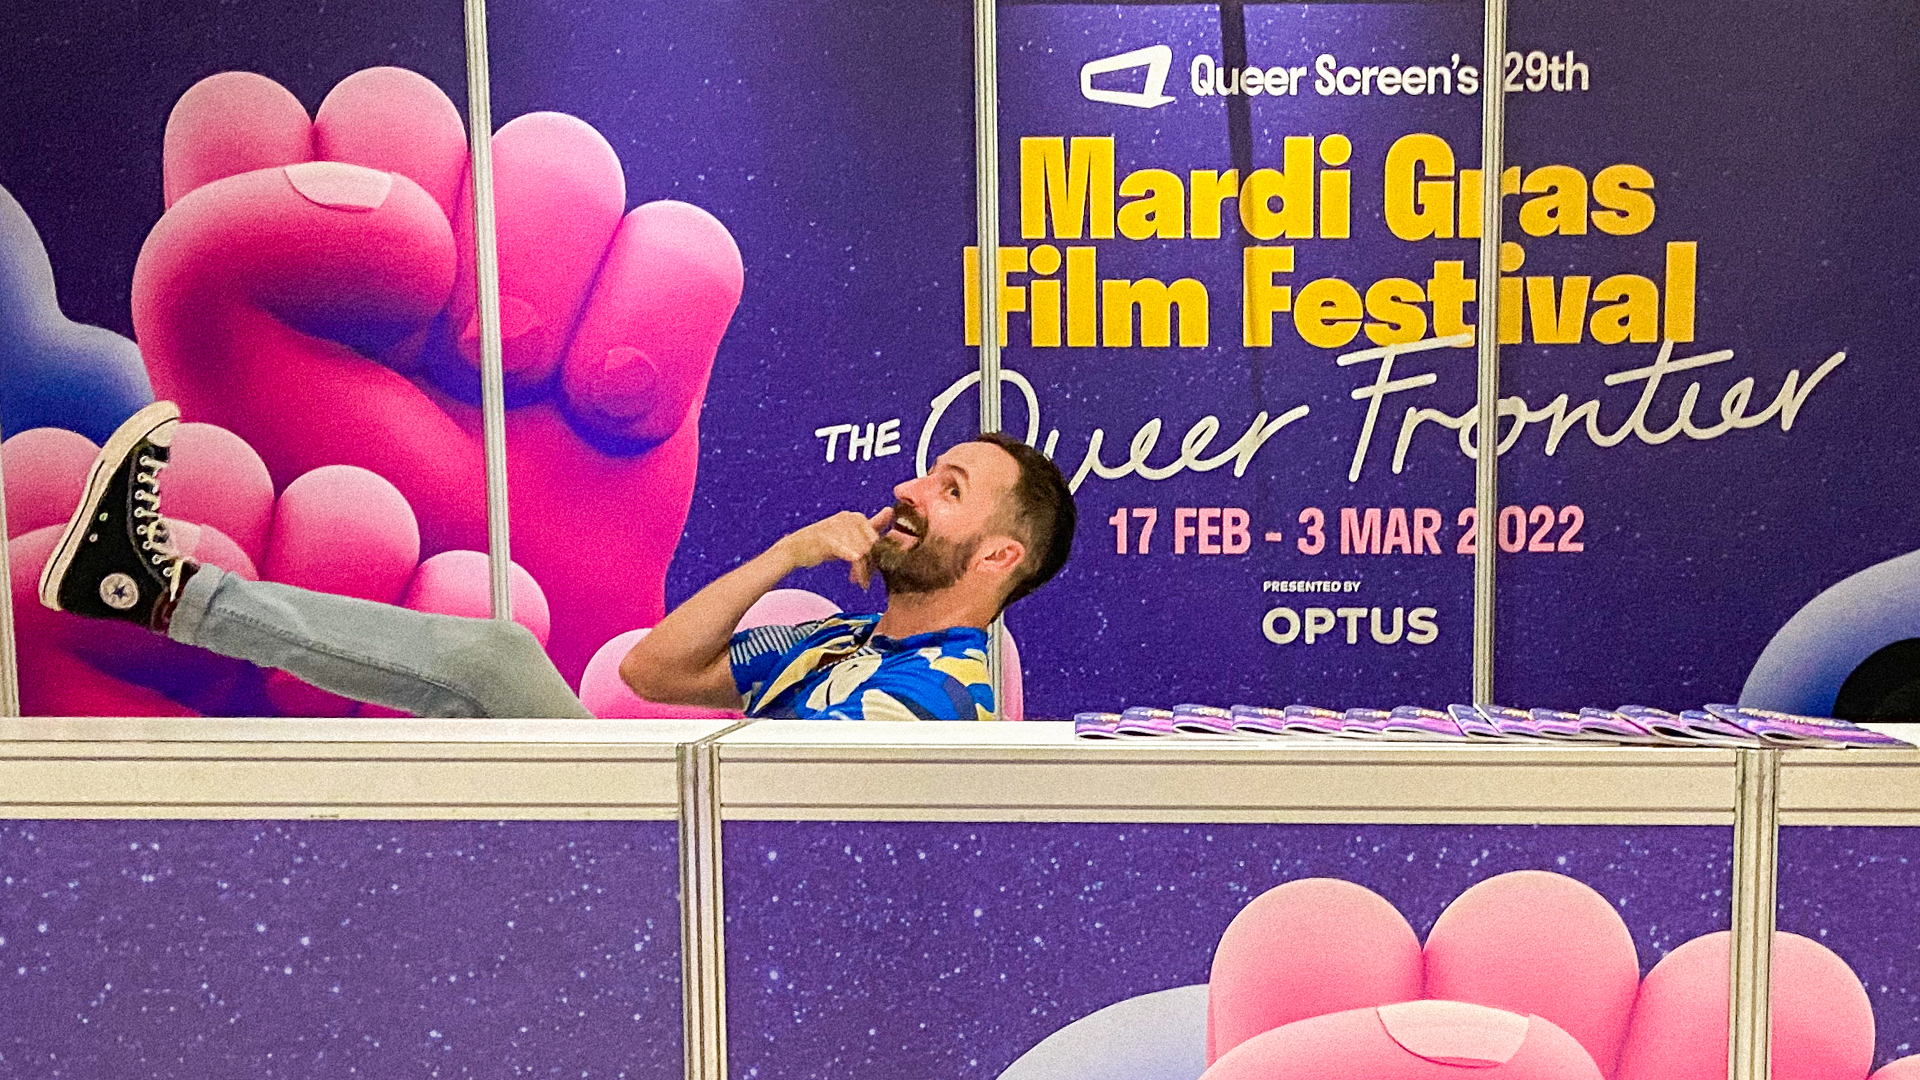 A person wearing a blue button up is sitting on a chair, resting their legs up on the desk, talking on the phone while smiling. The desk and backdrop are purple, and the backdrop says "Mardi Gras Film Festival Queer Frontier".